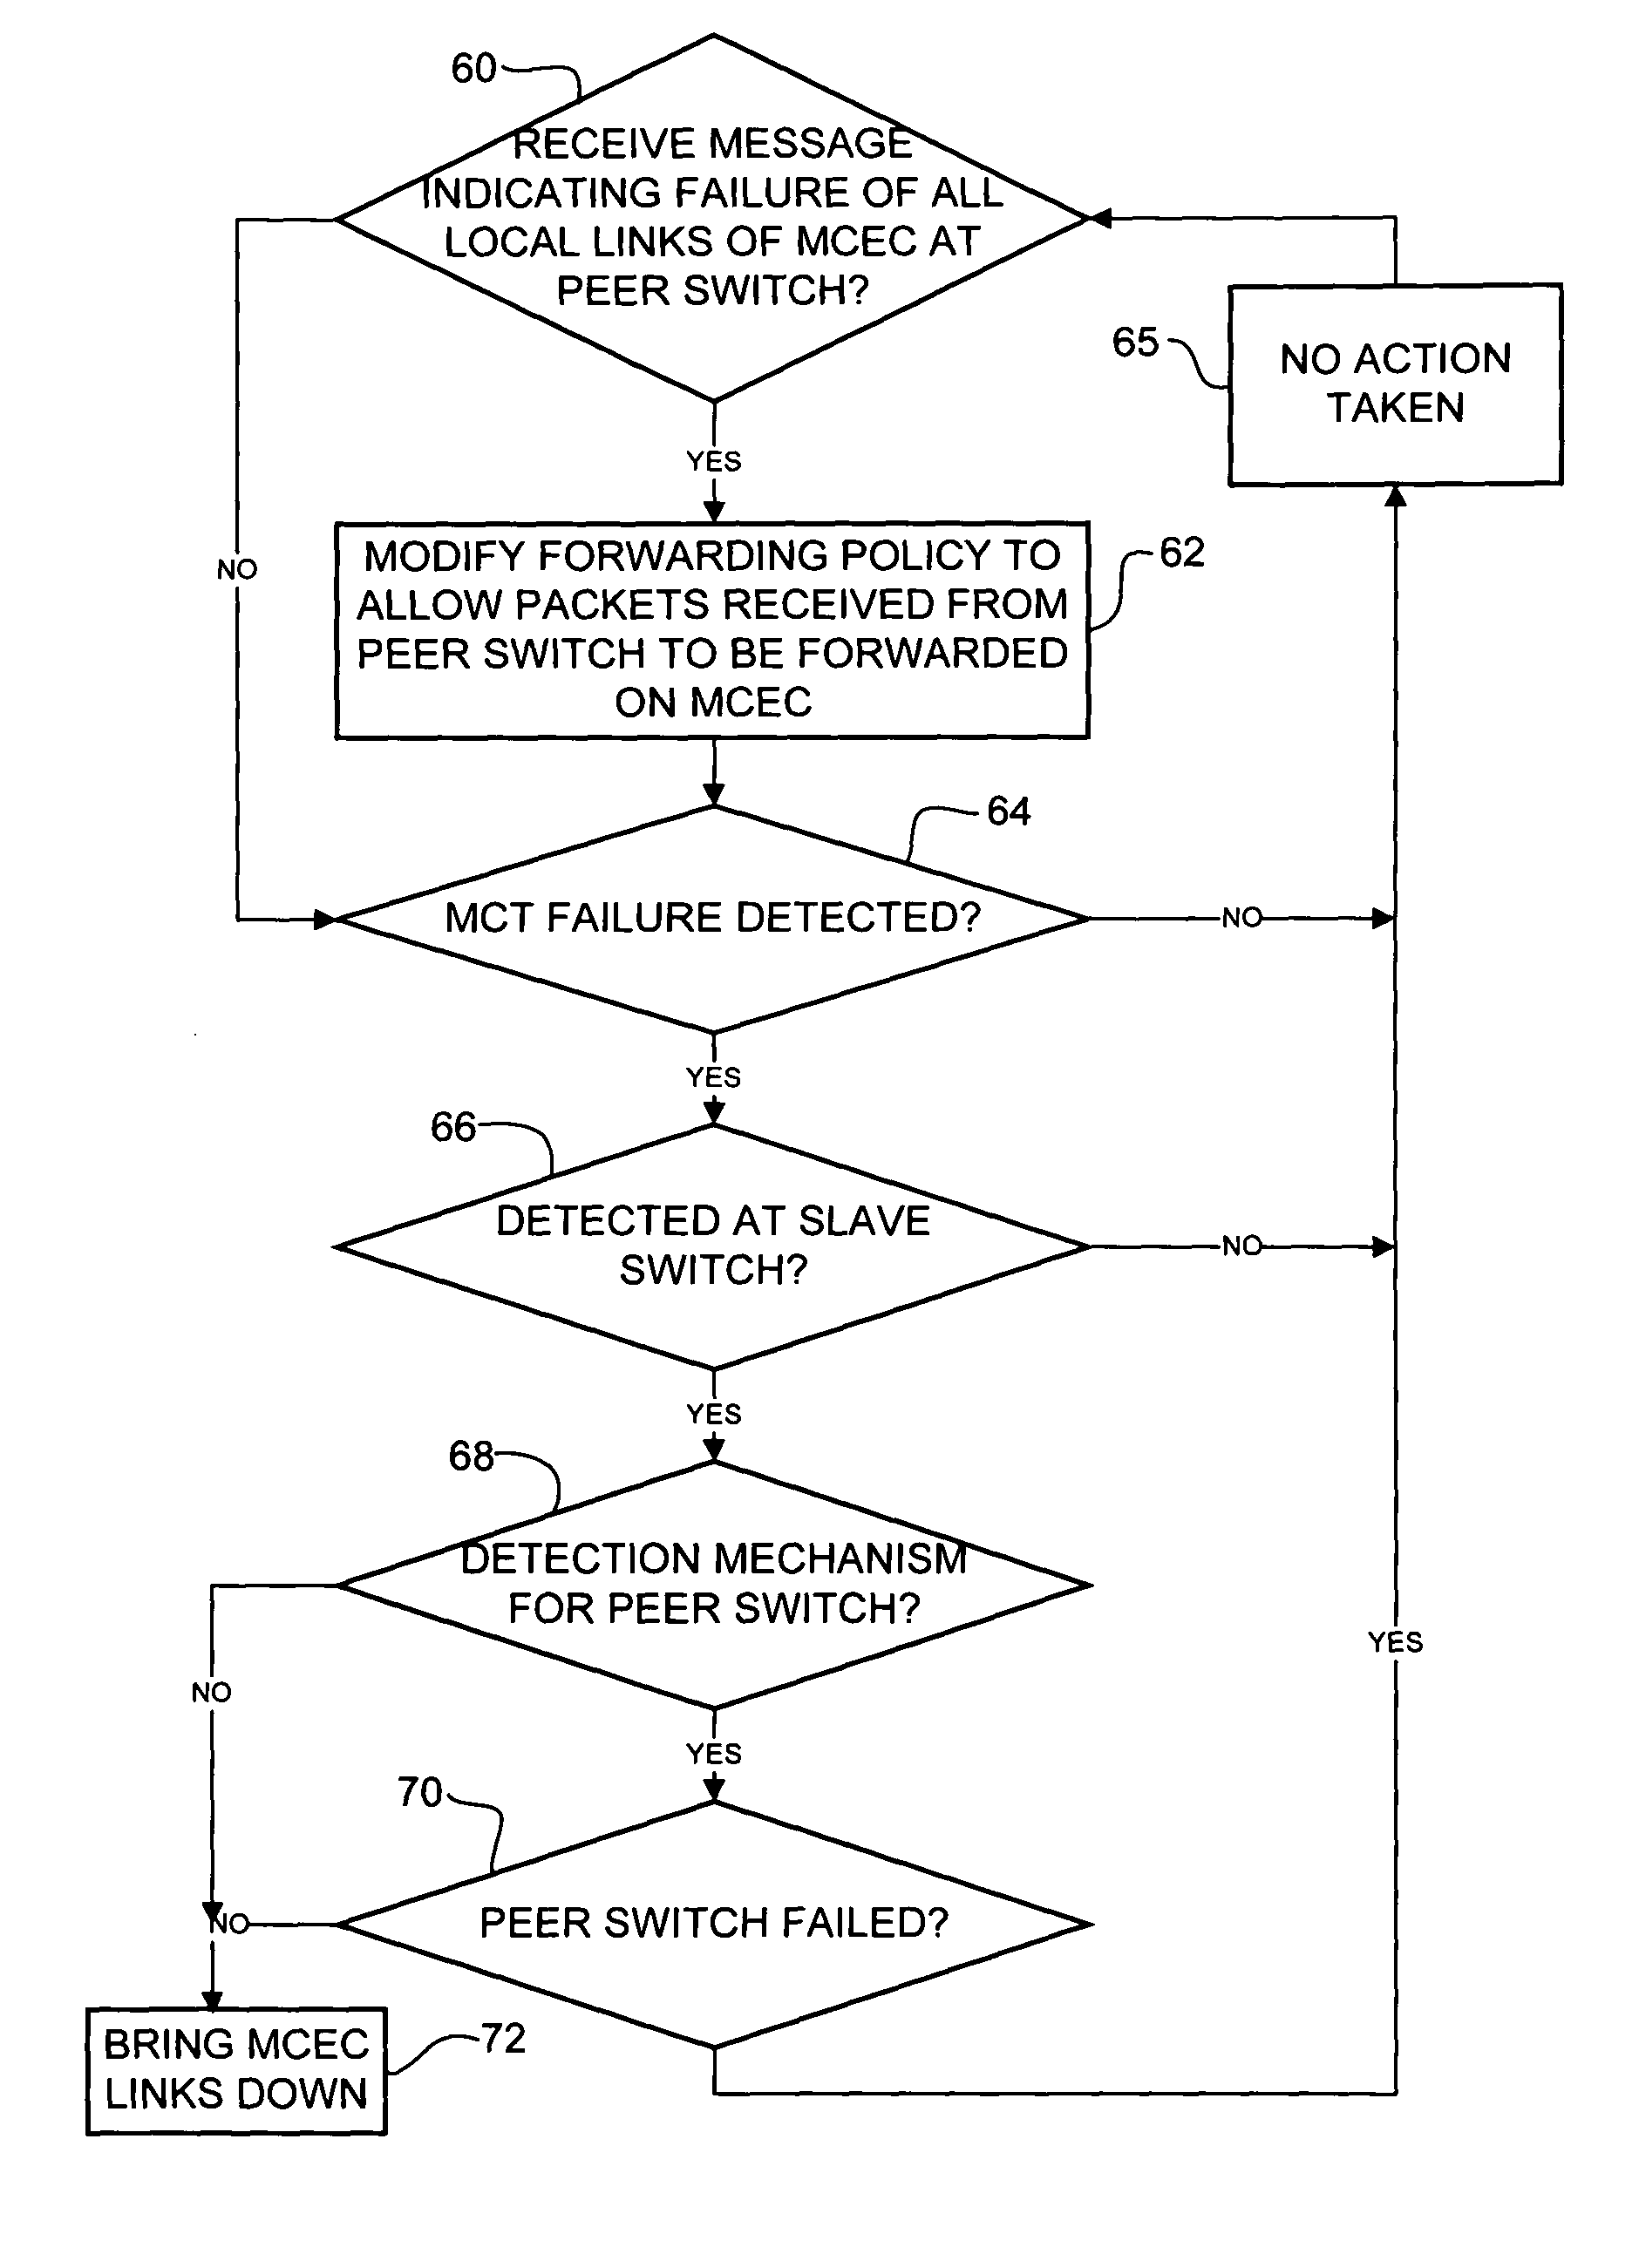 Virtual port channel switches with distributed control planes